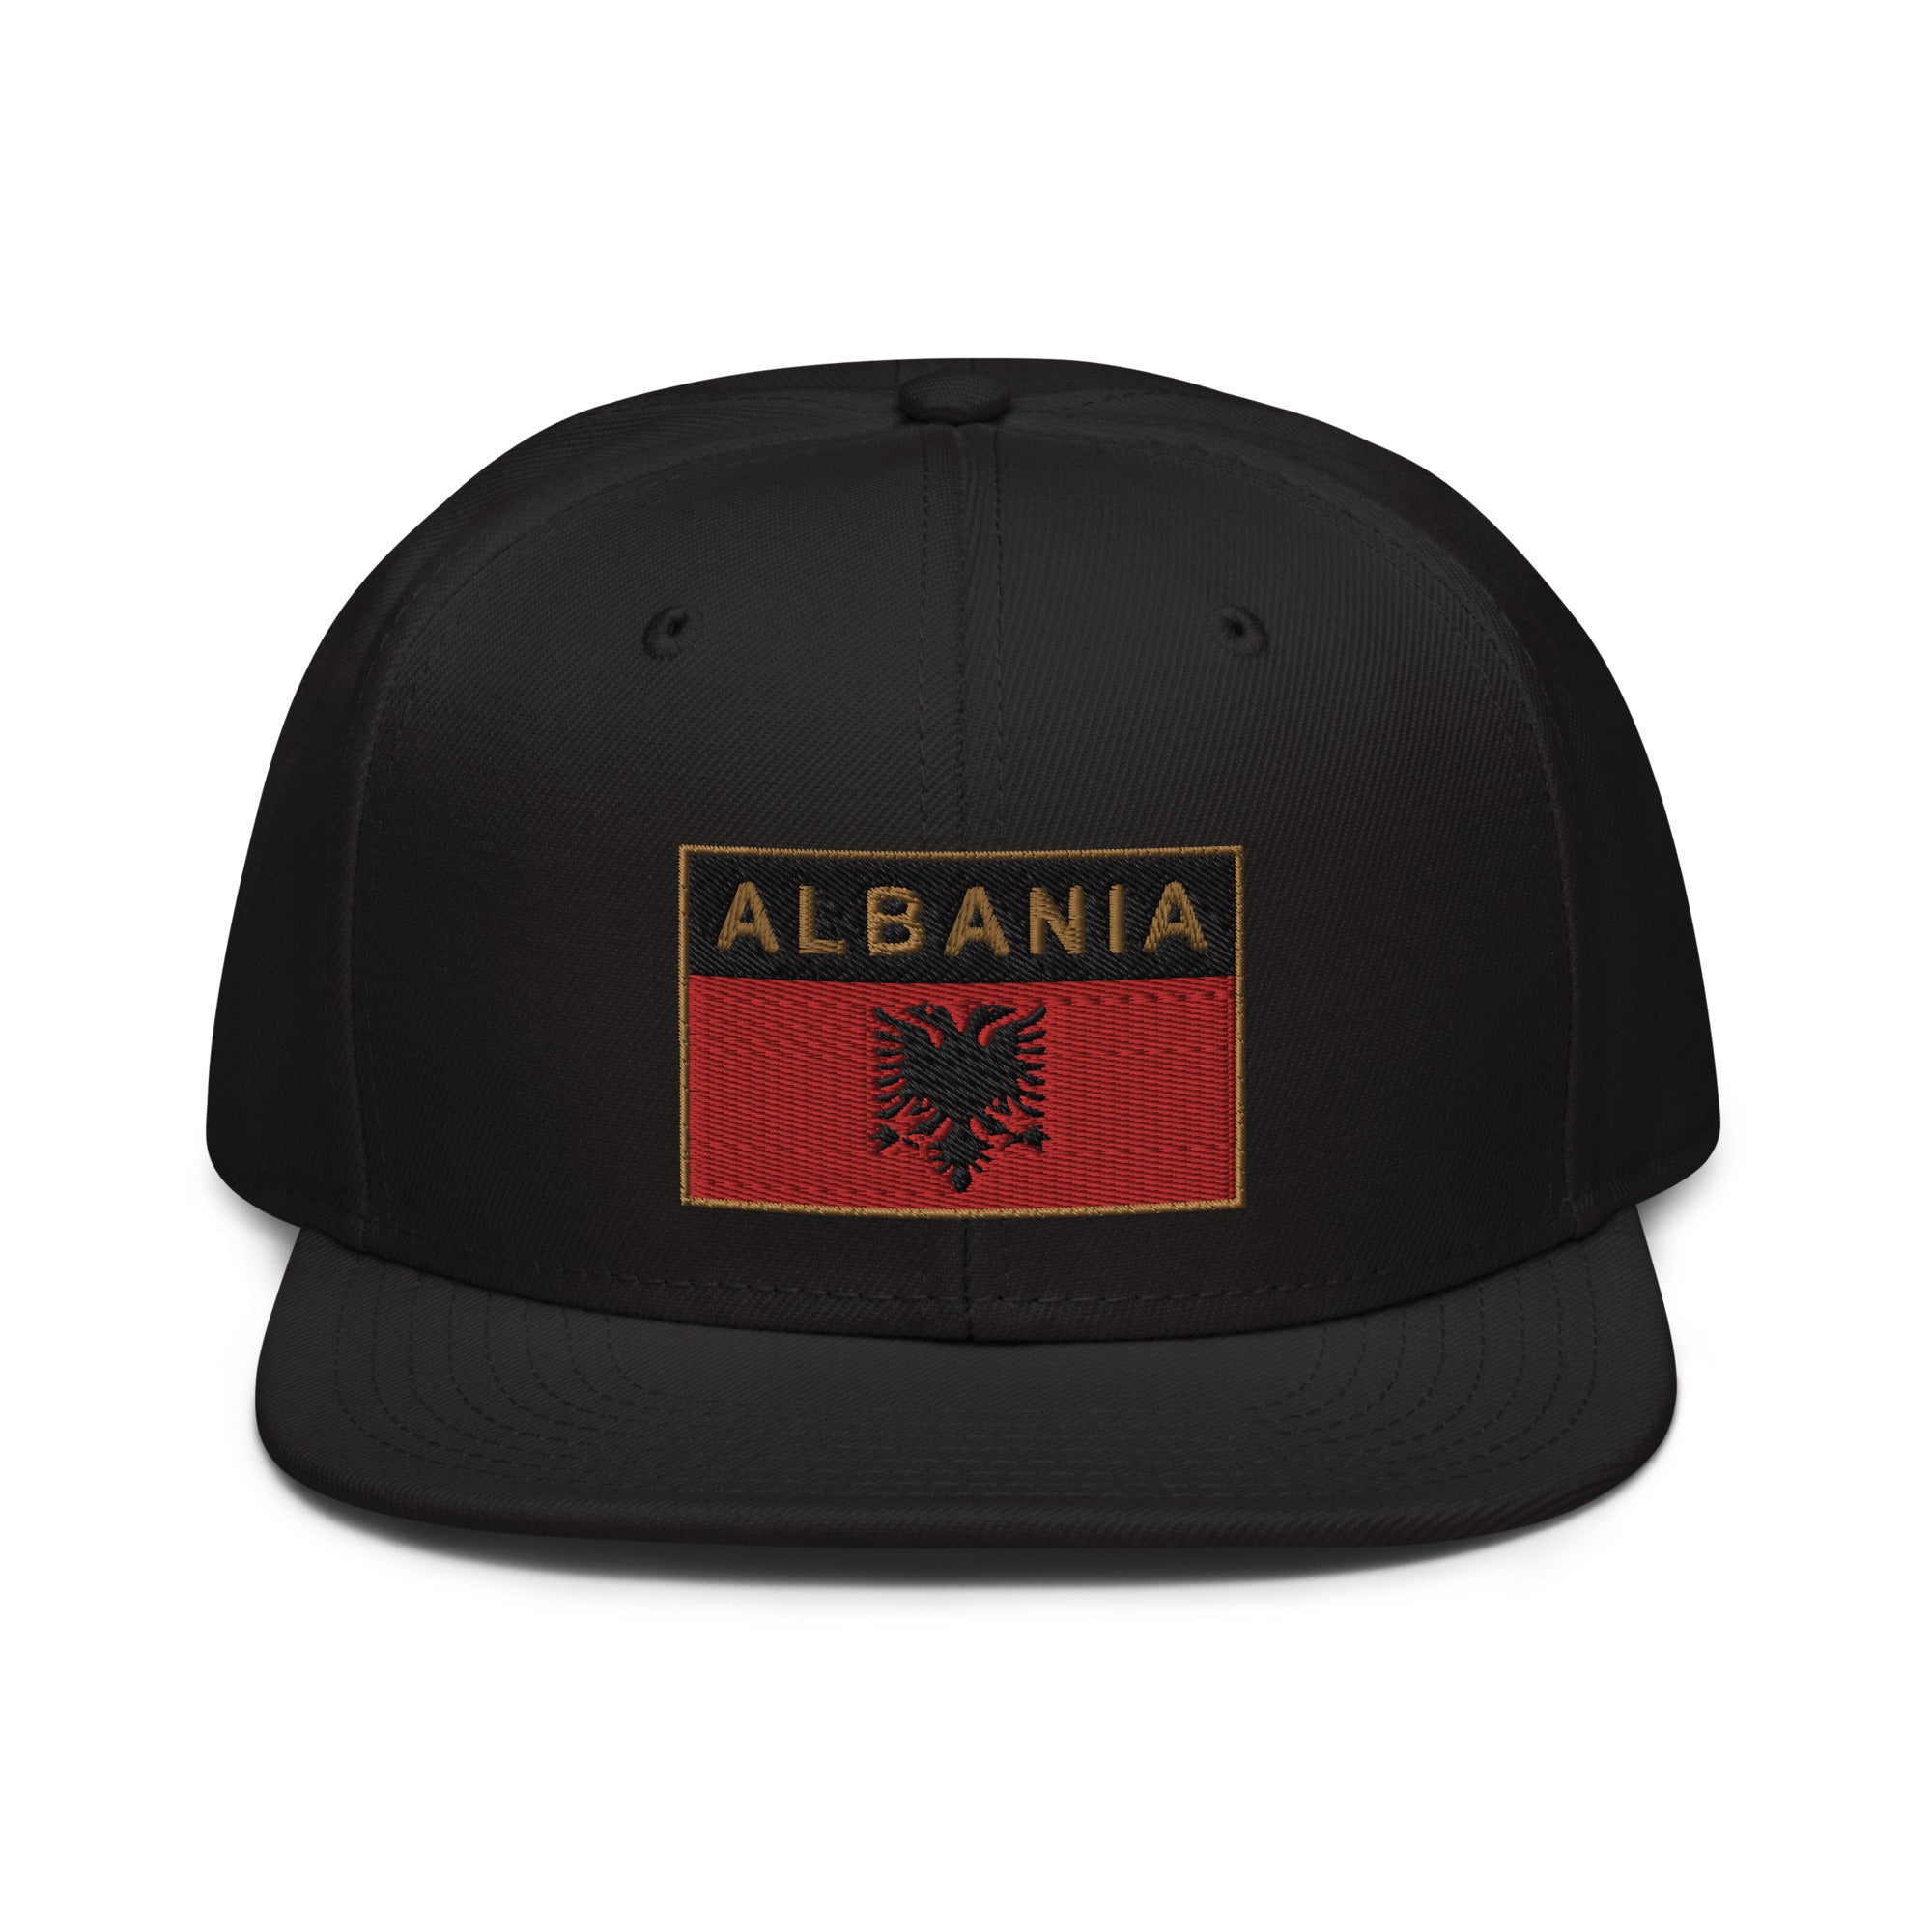 Albania military logo Embroidered patches